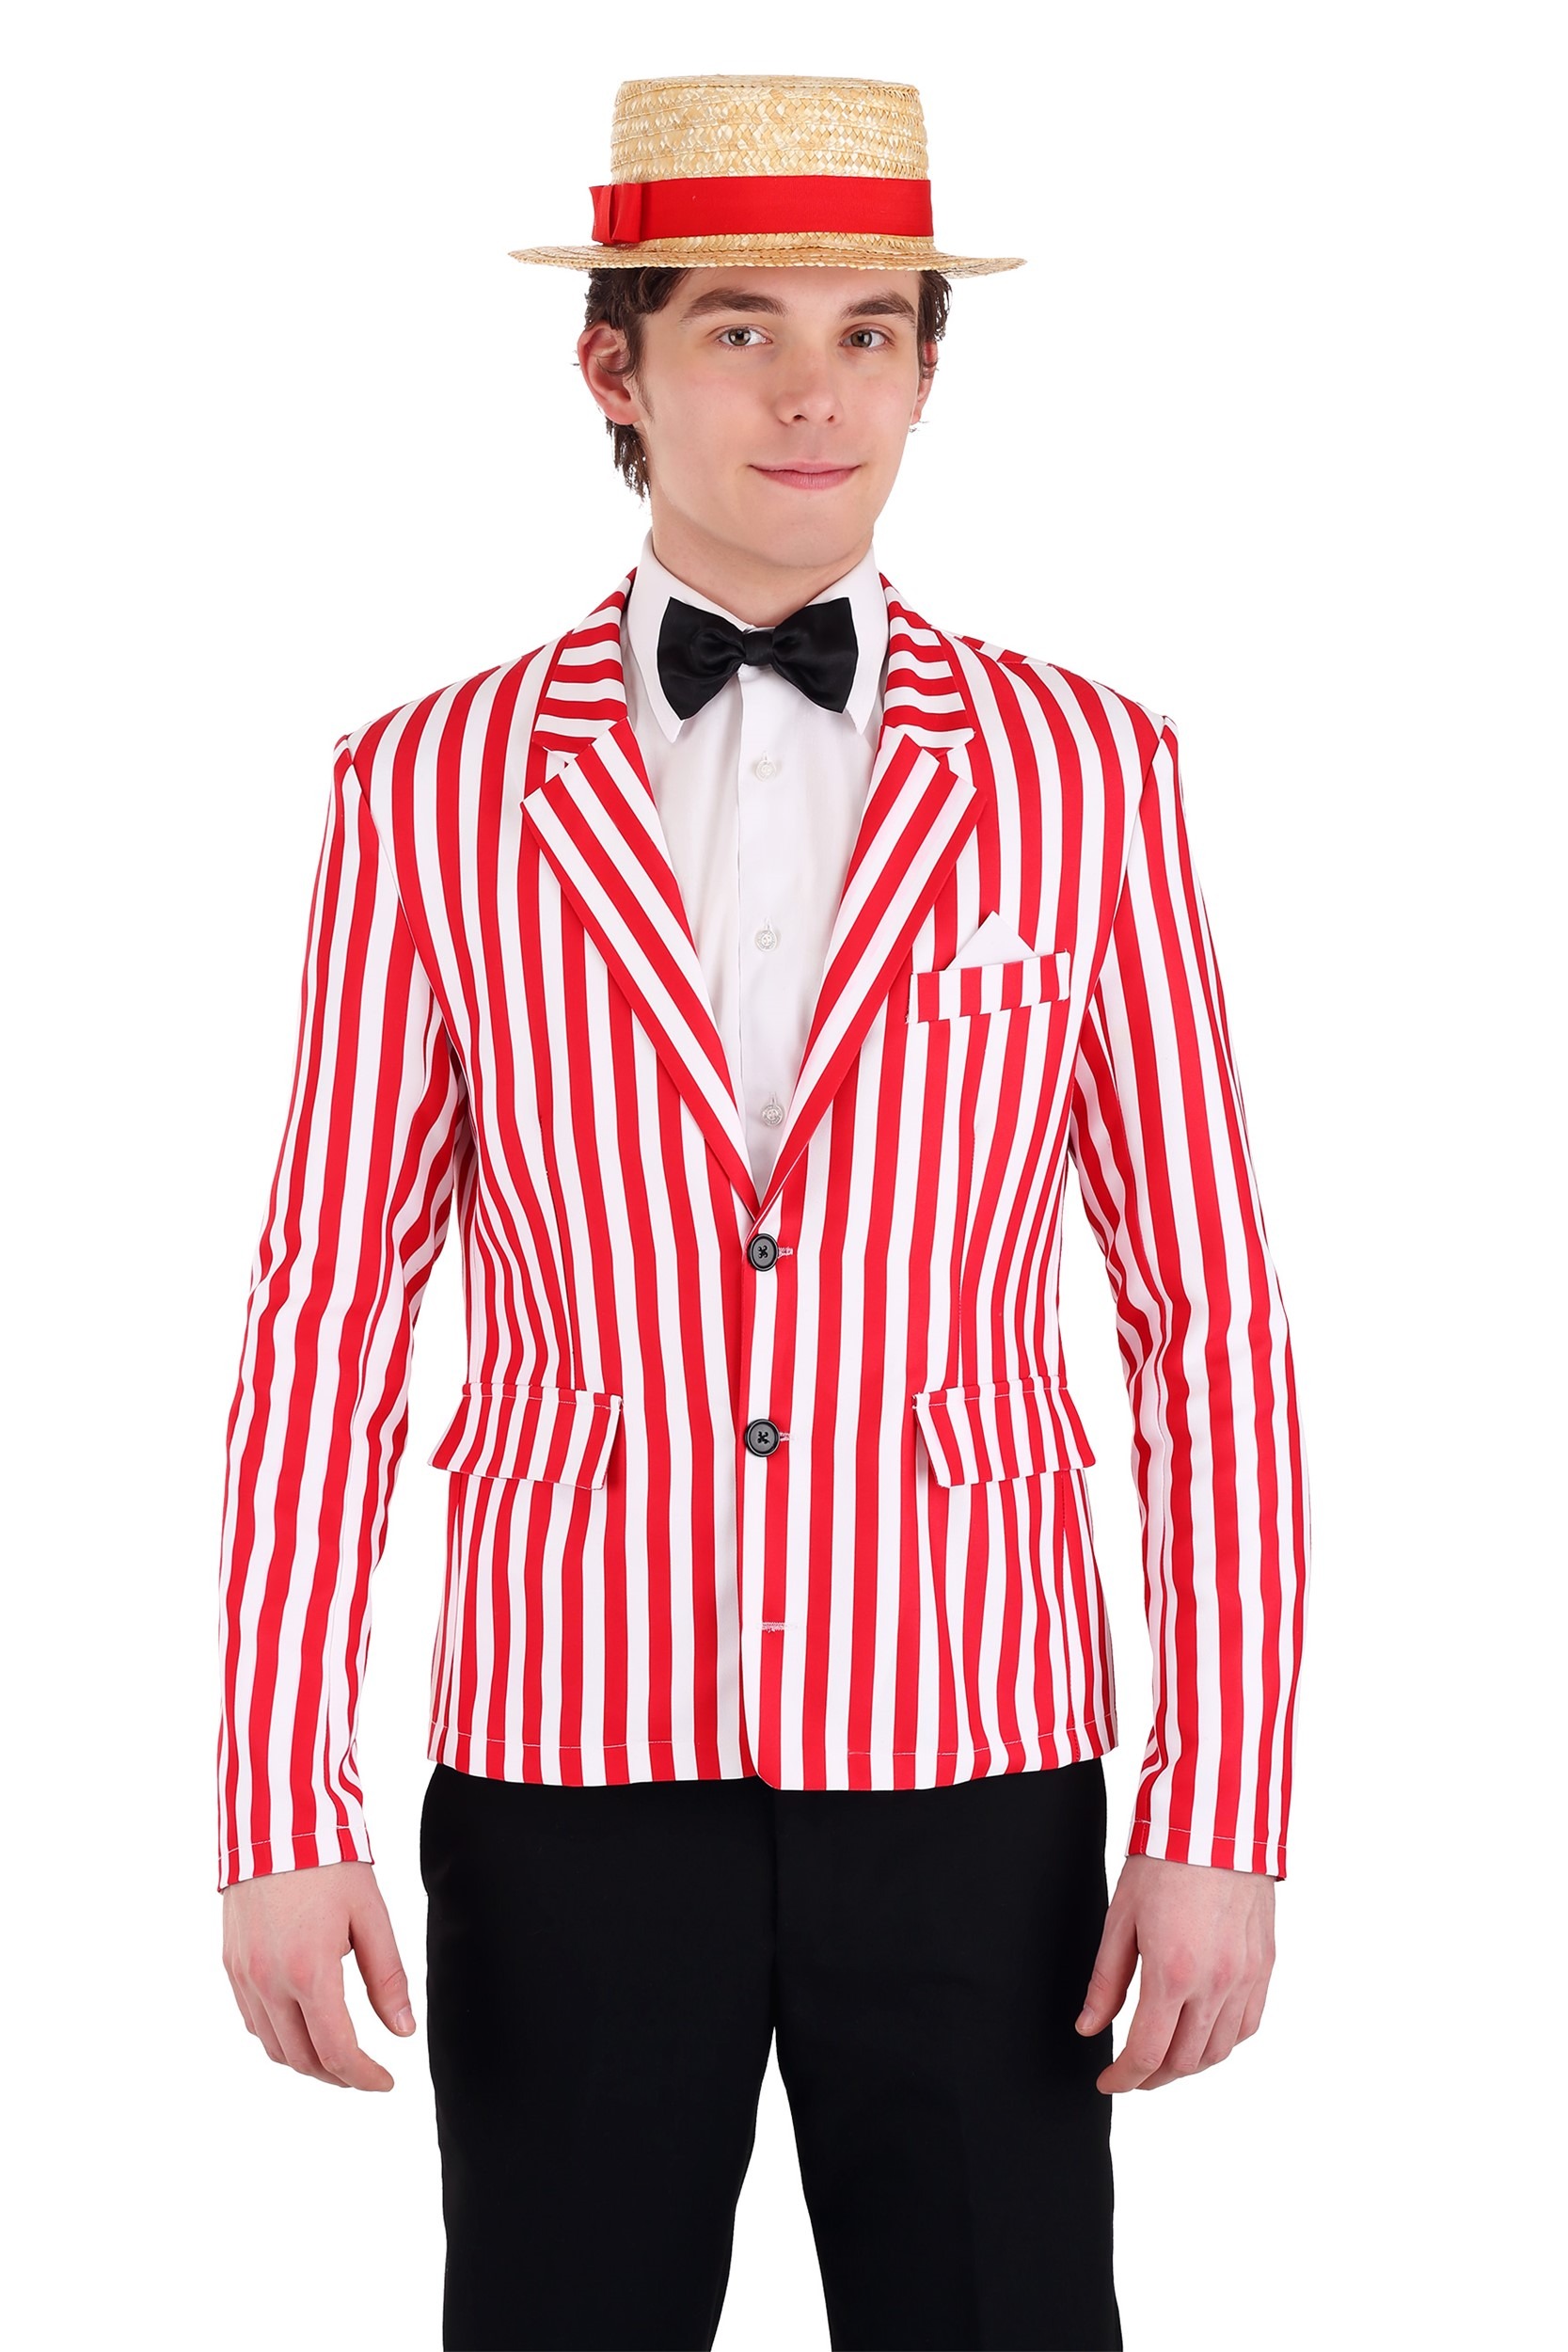 Photos - Fancy Dress FUN Costumes Candy Striped Jacket Men's Costume Red/White FUN0683AD